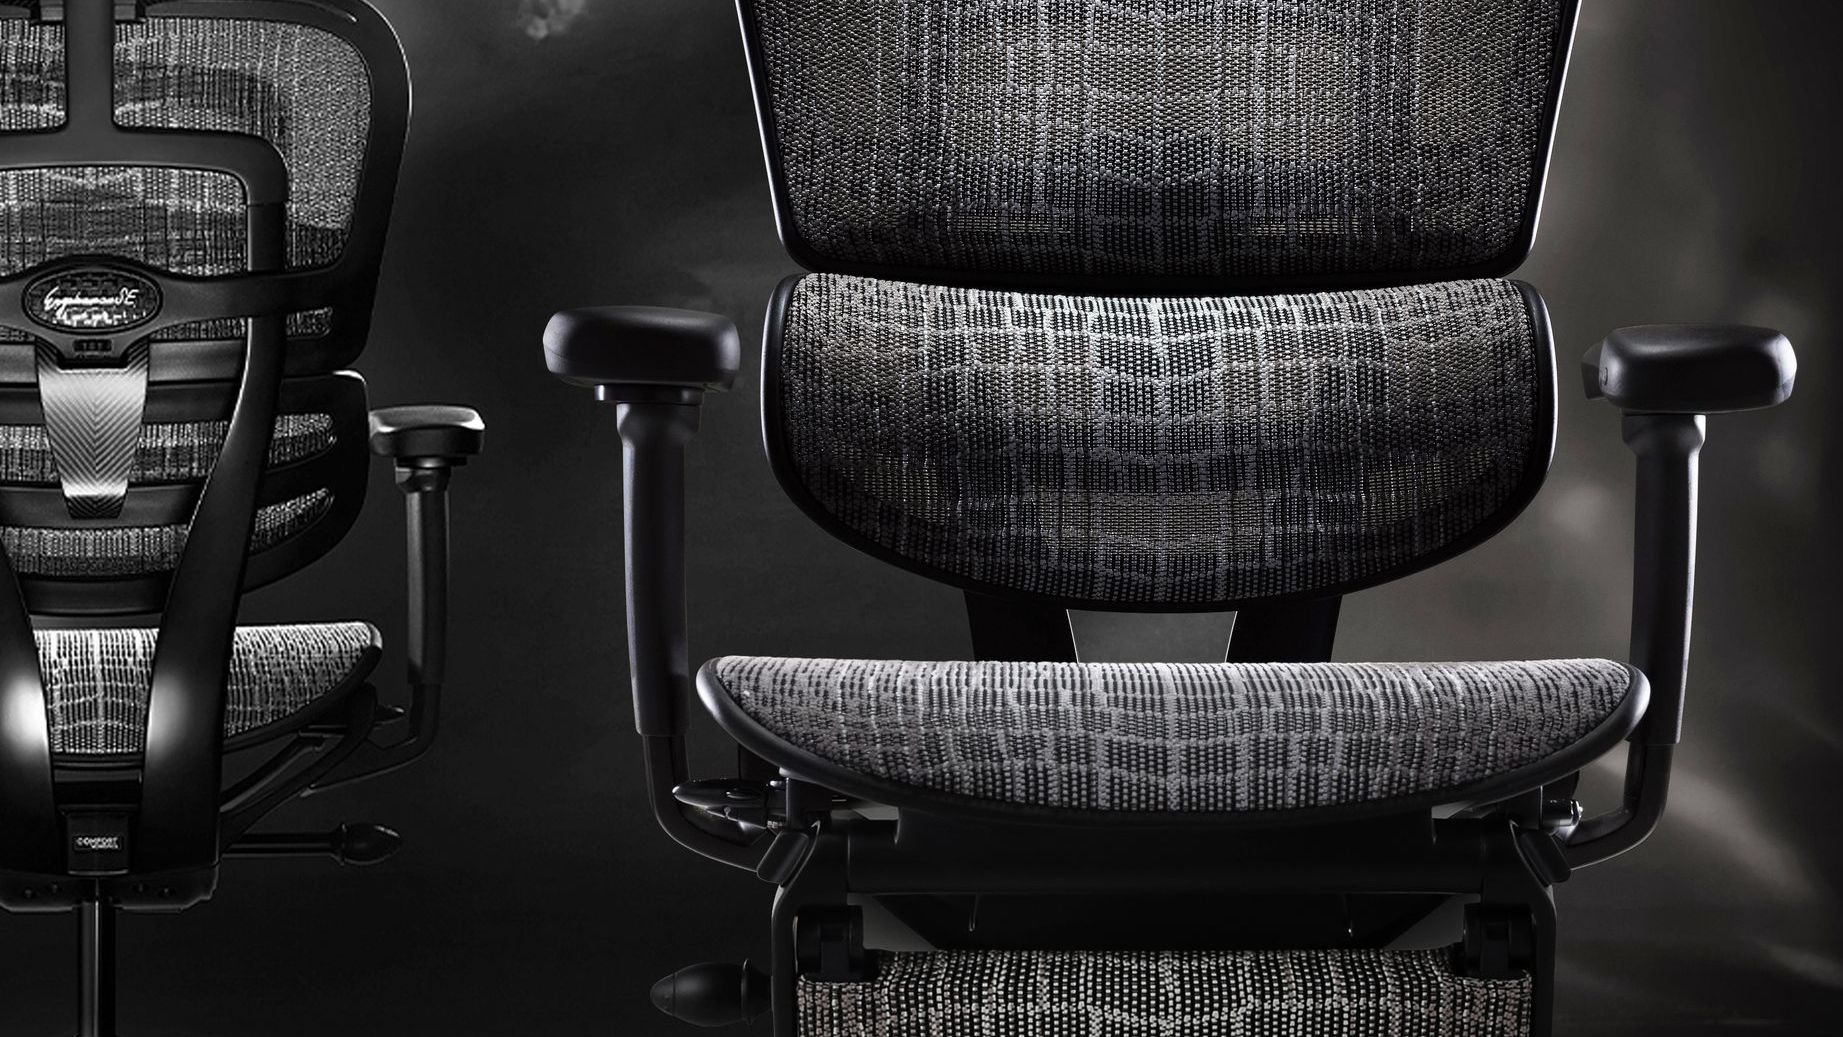 Two Ergohuman Carbon gaming chairs against a black smokey background. One chair is facing the camera, and the other is facing away. 